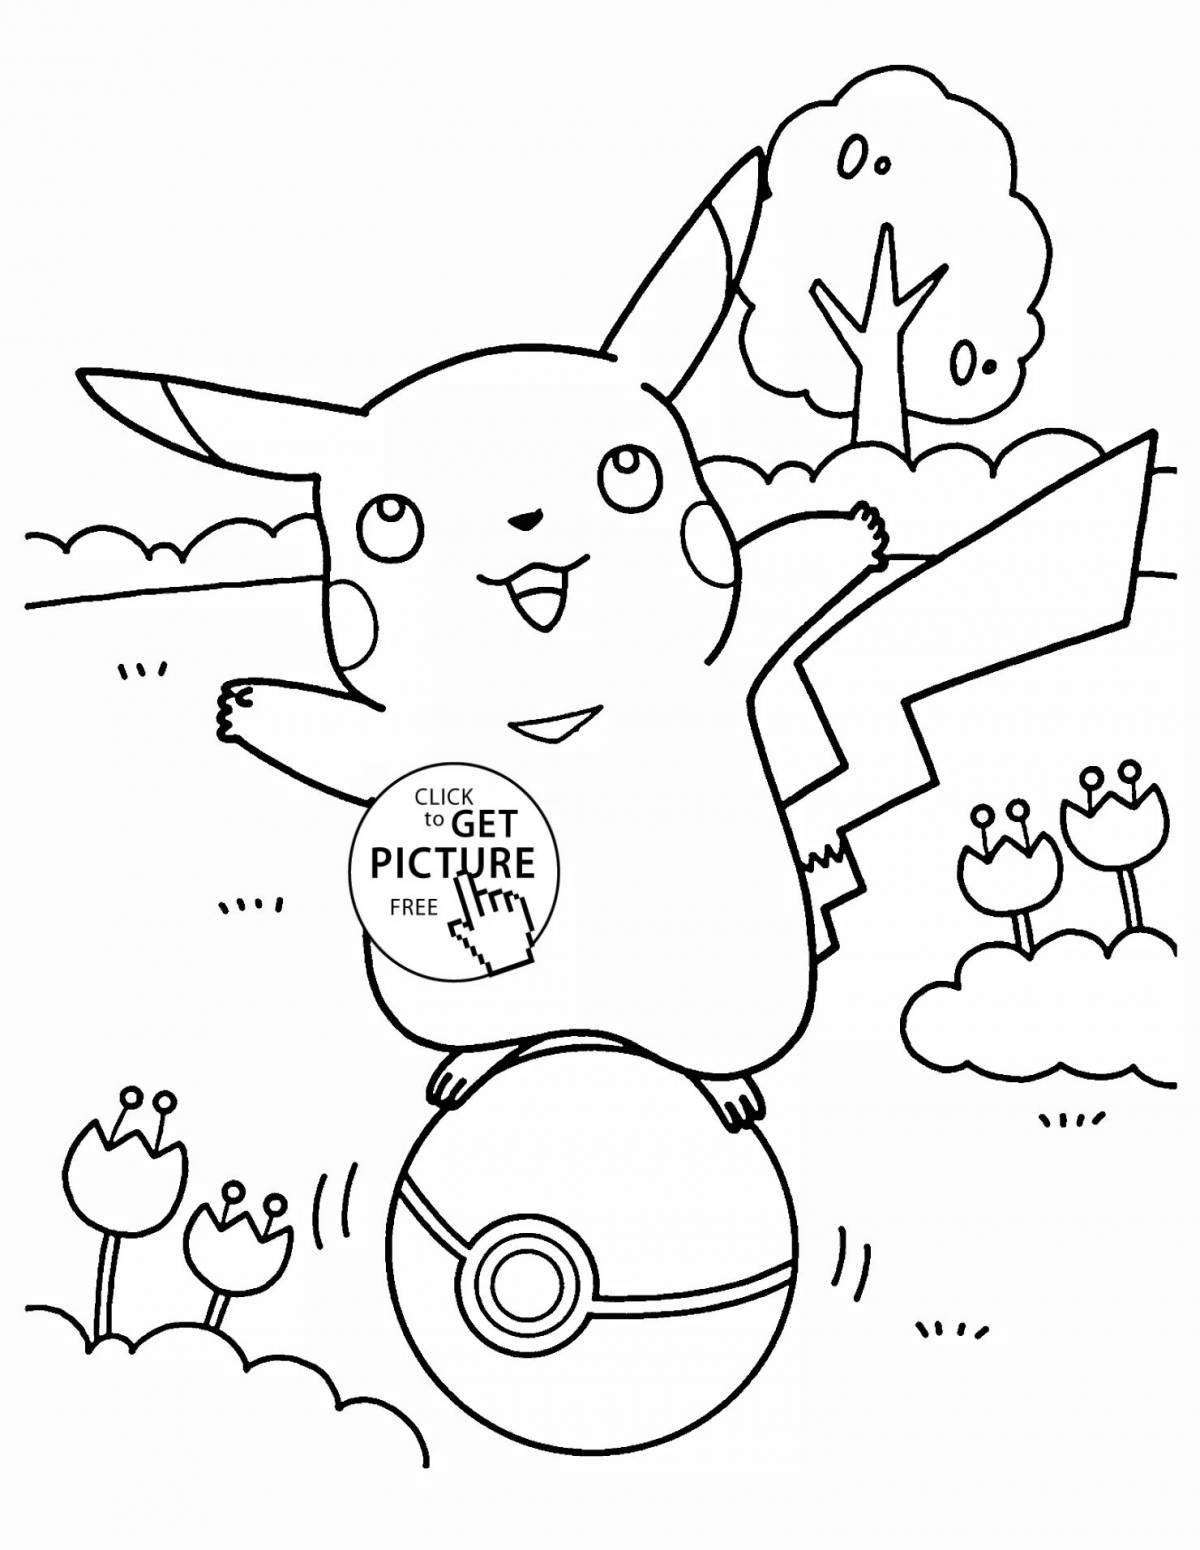 Great pikachu coloring book for boys